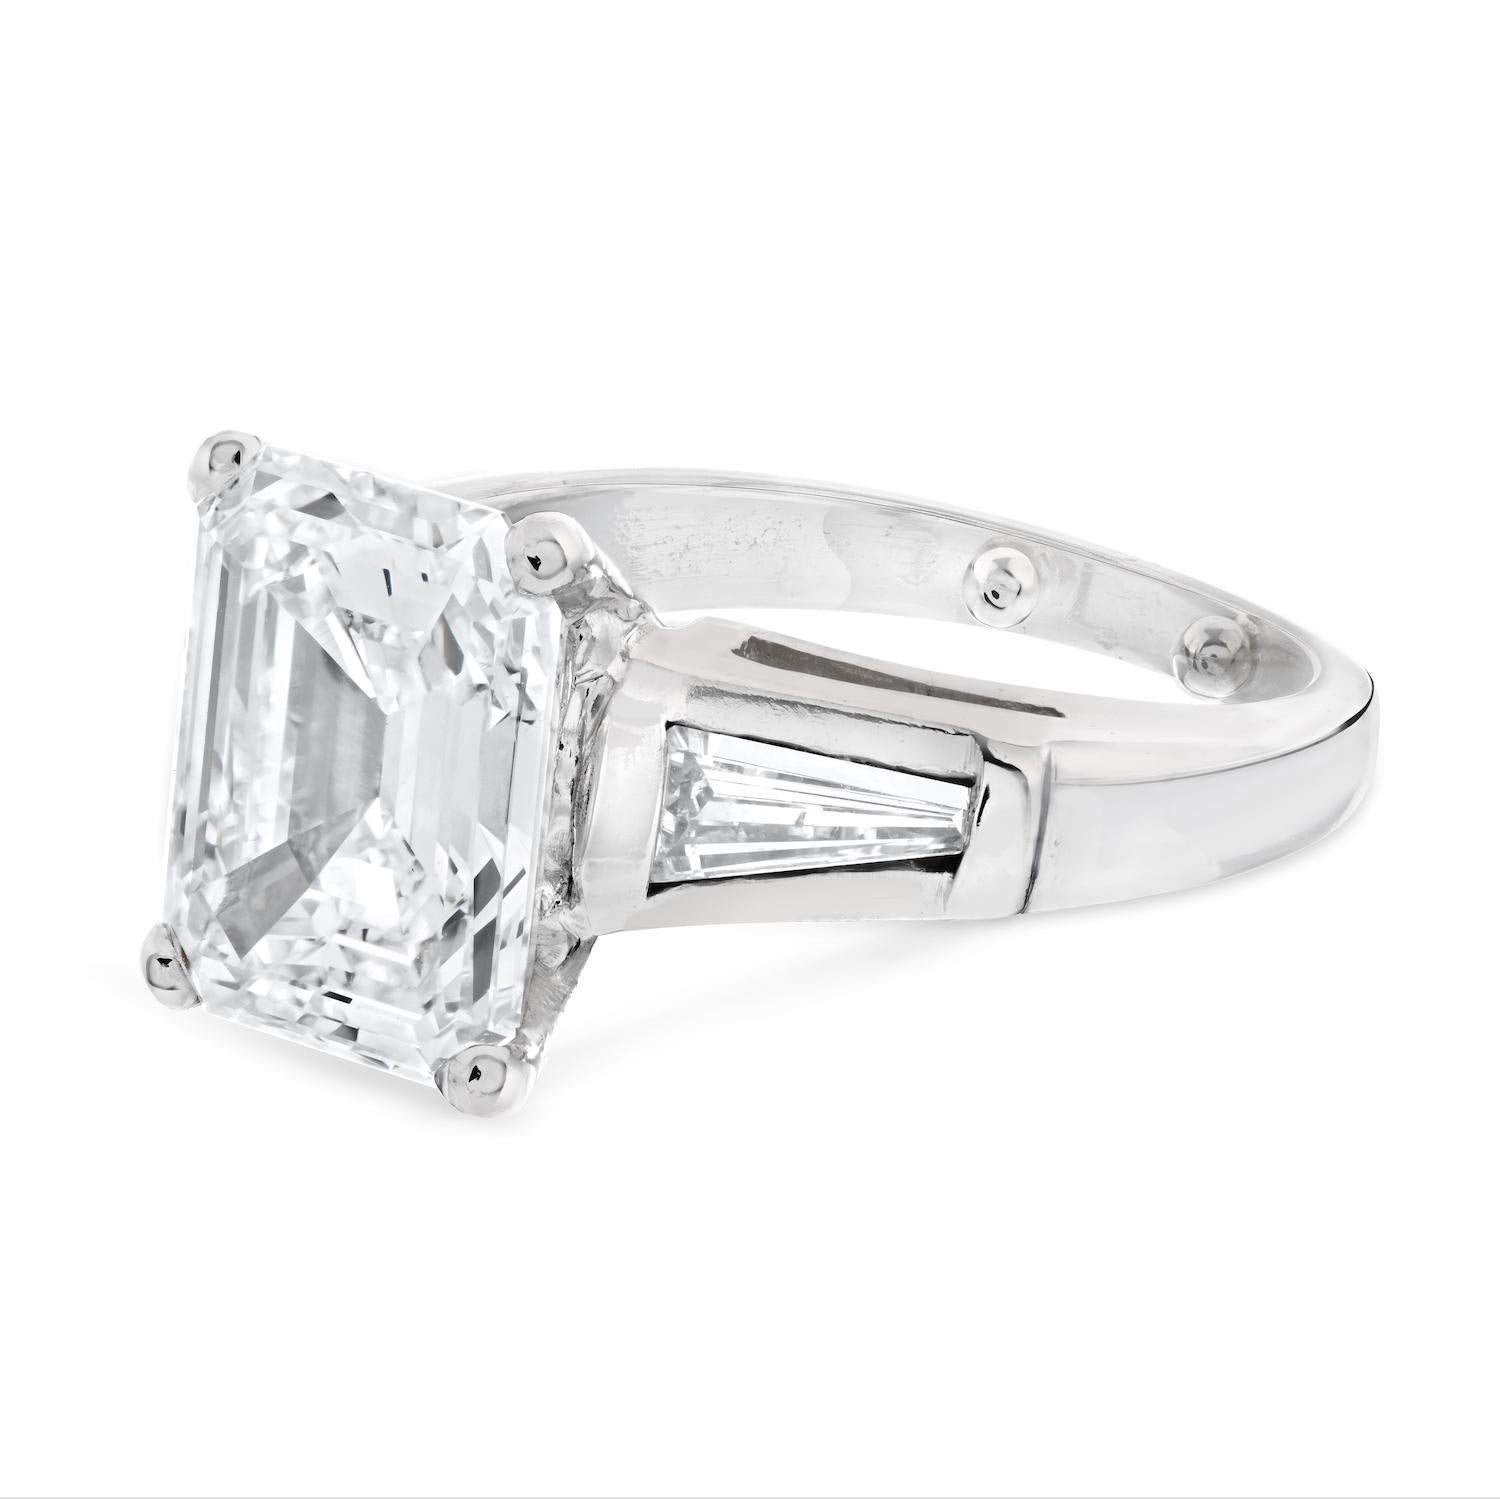 4 carat emerald cut diamond ring with baguettes